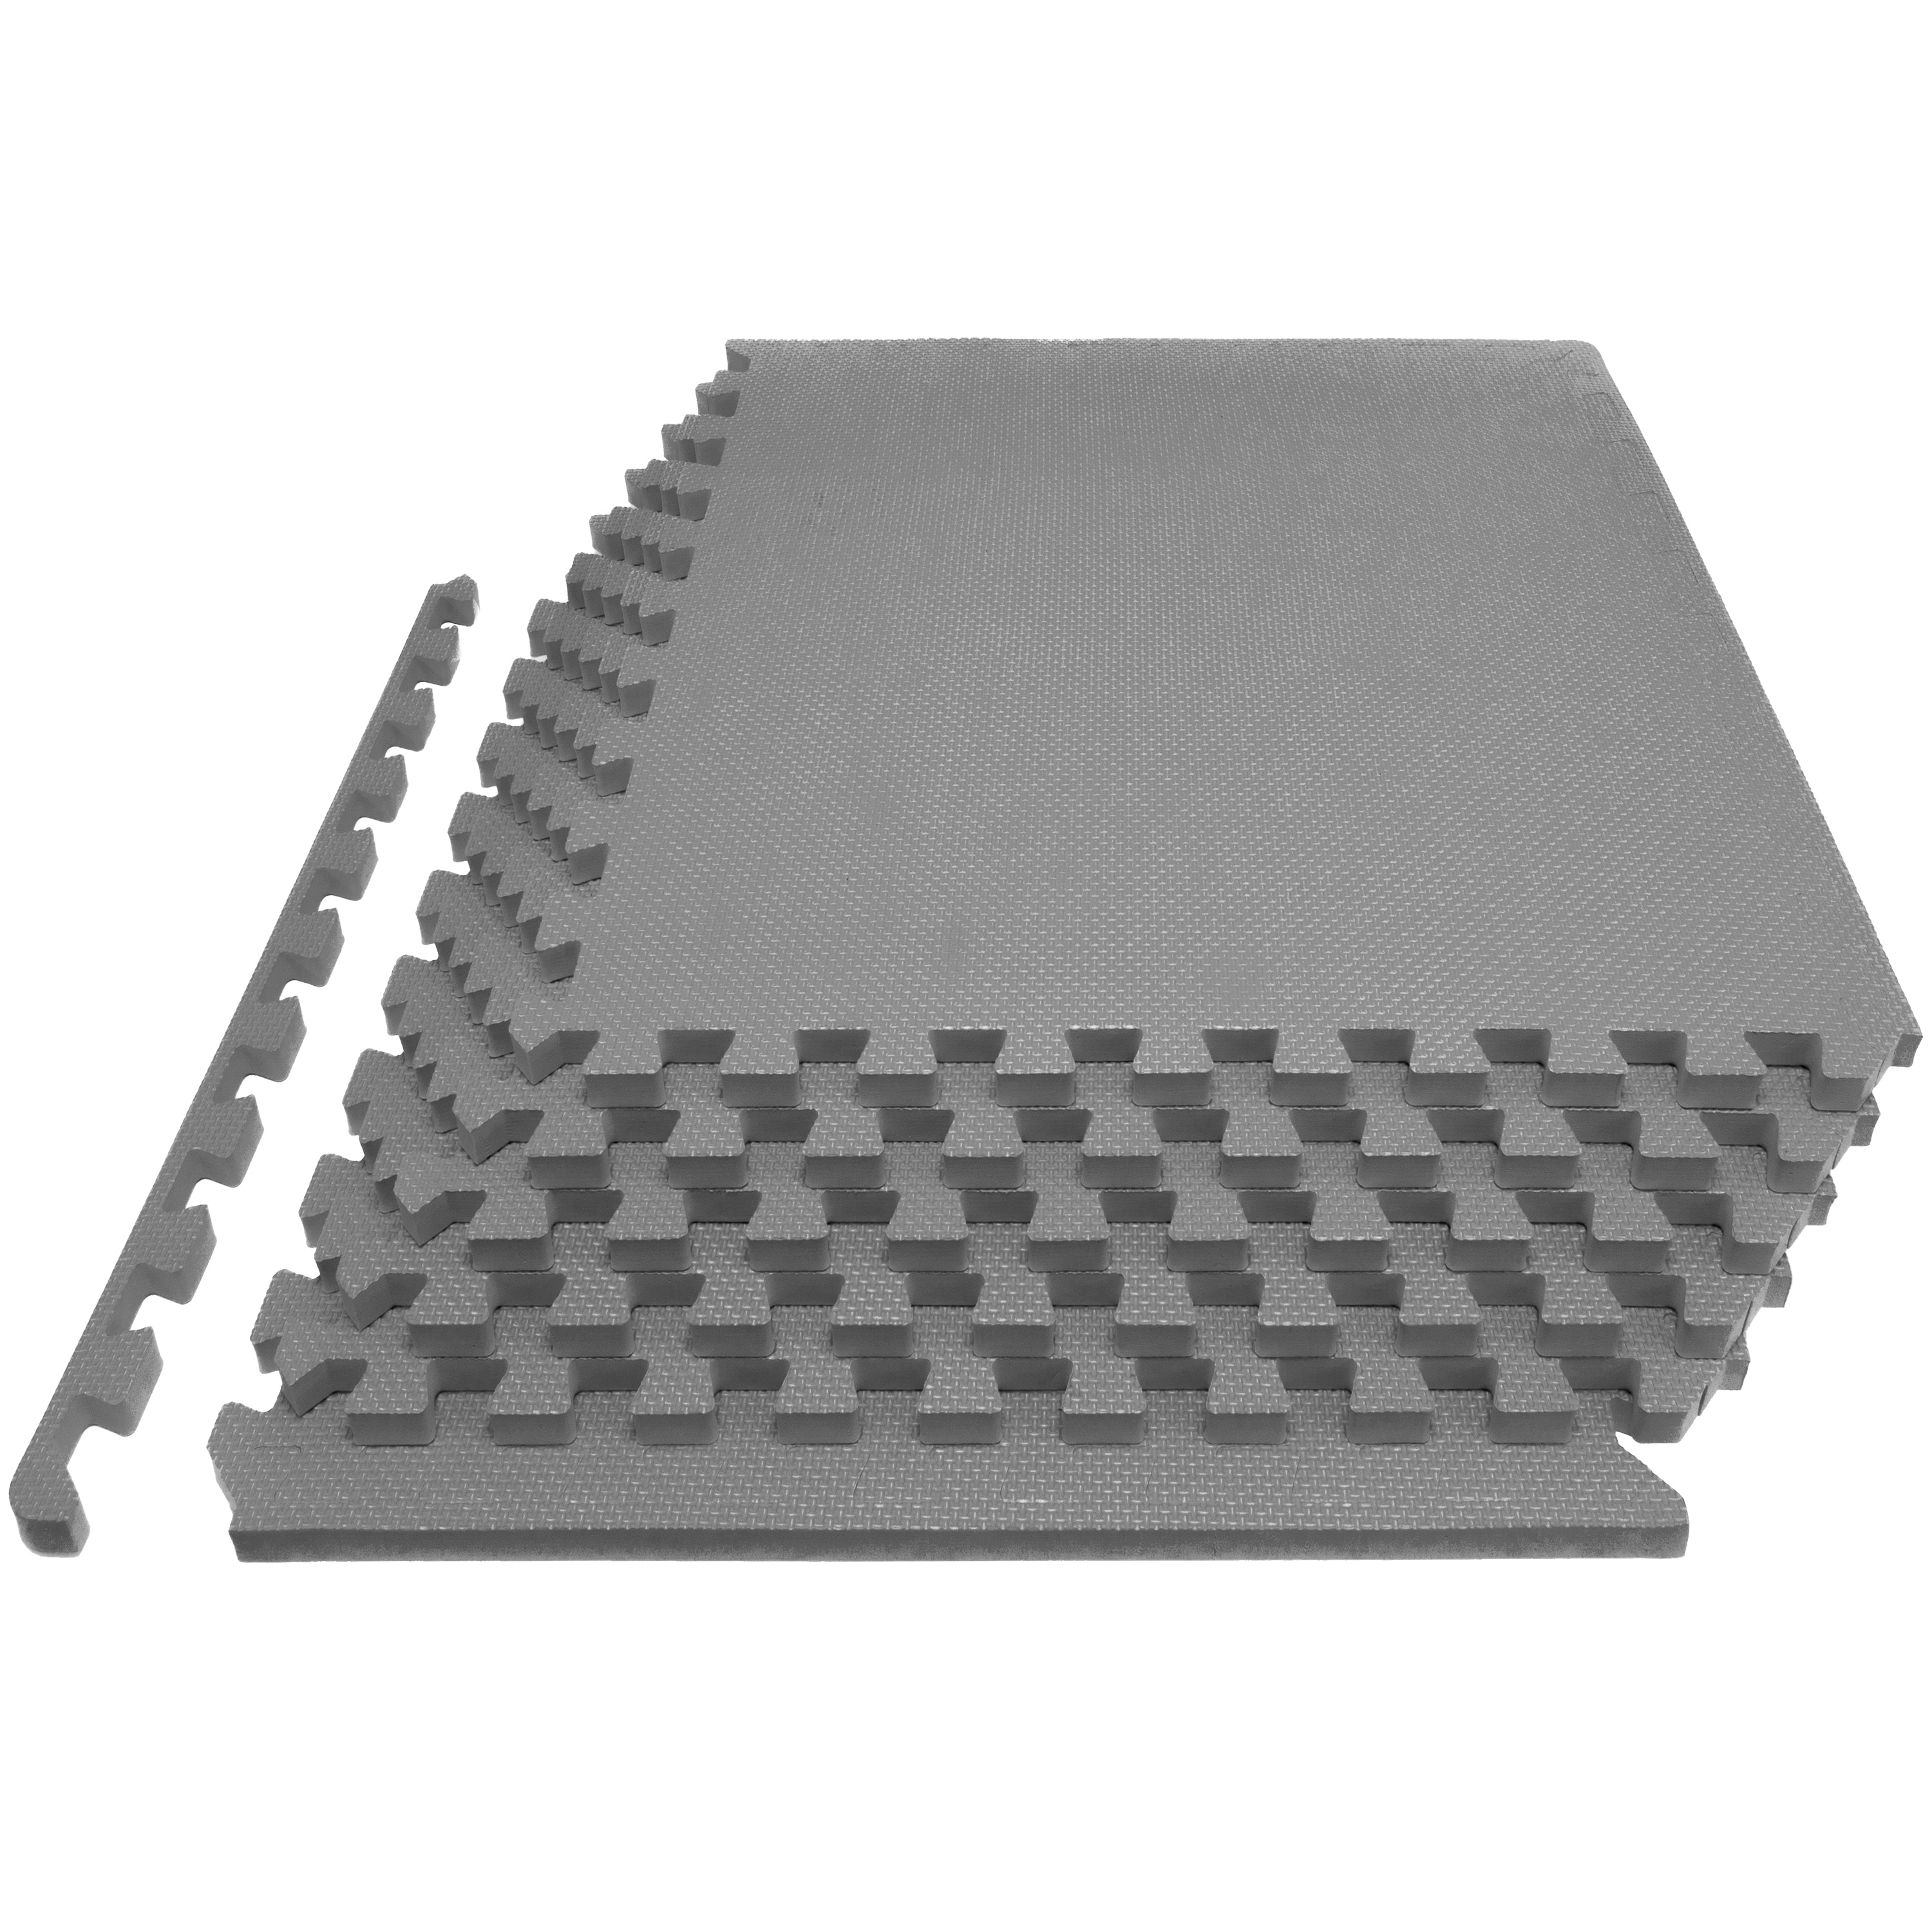 Puzzle Mat Exercise Tools Gym Equipment Floor Protector Workout Foam Tiles Gray